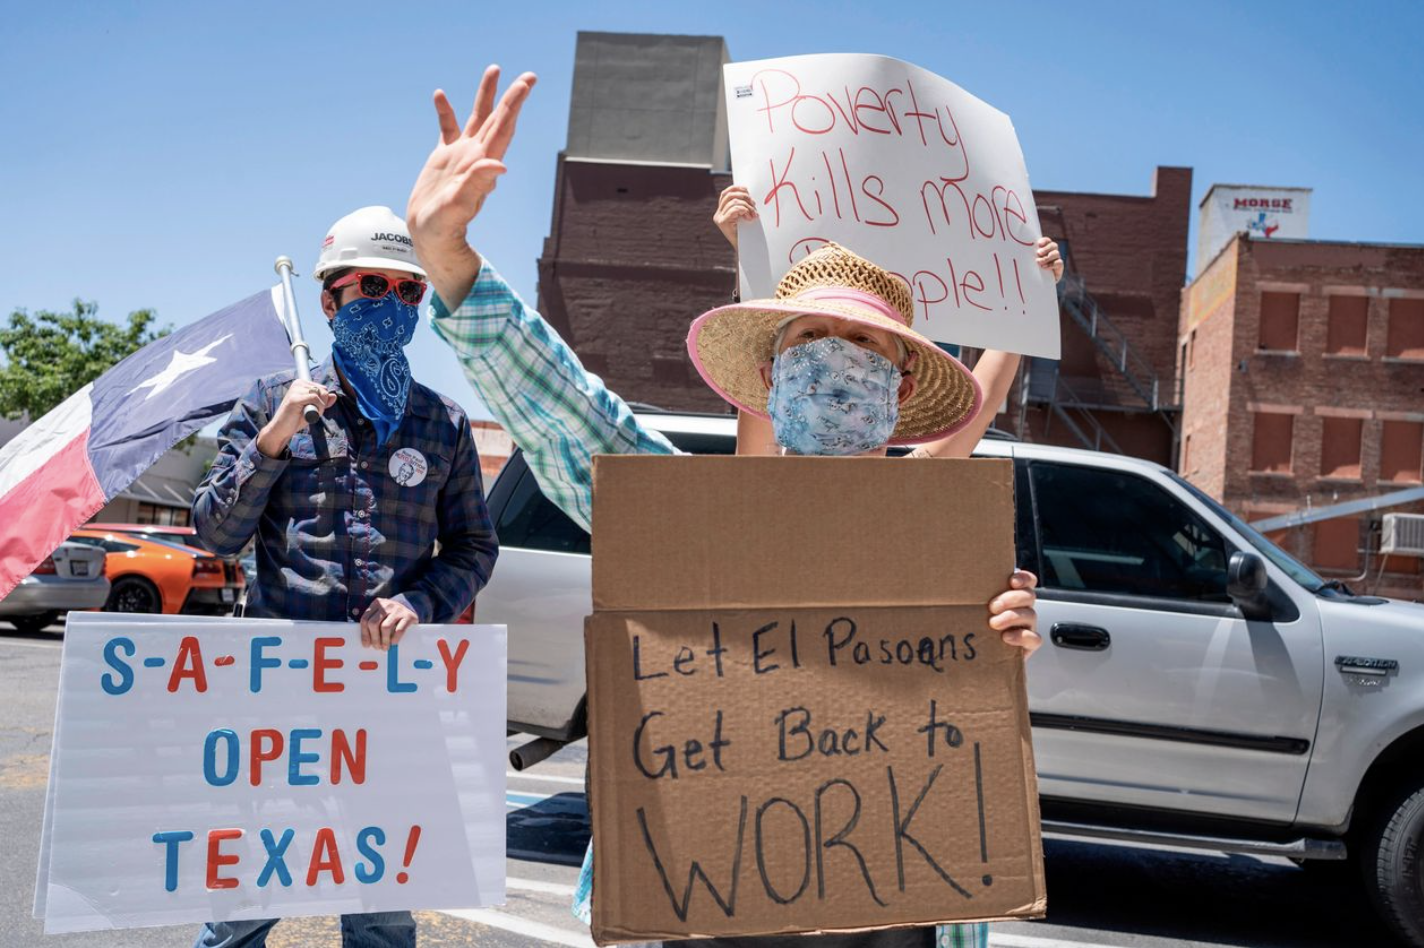 Protestors in masks call for reopening Texas